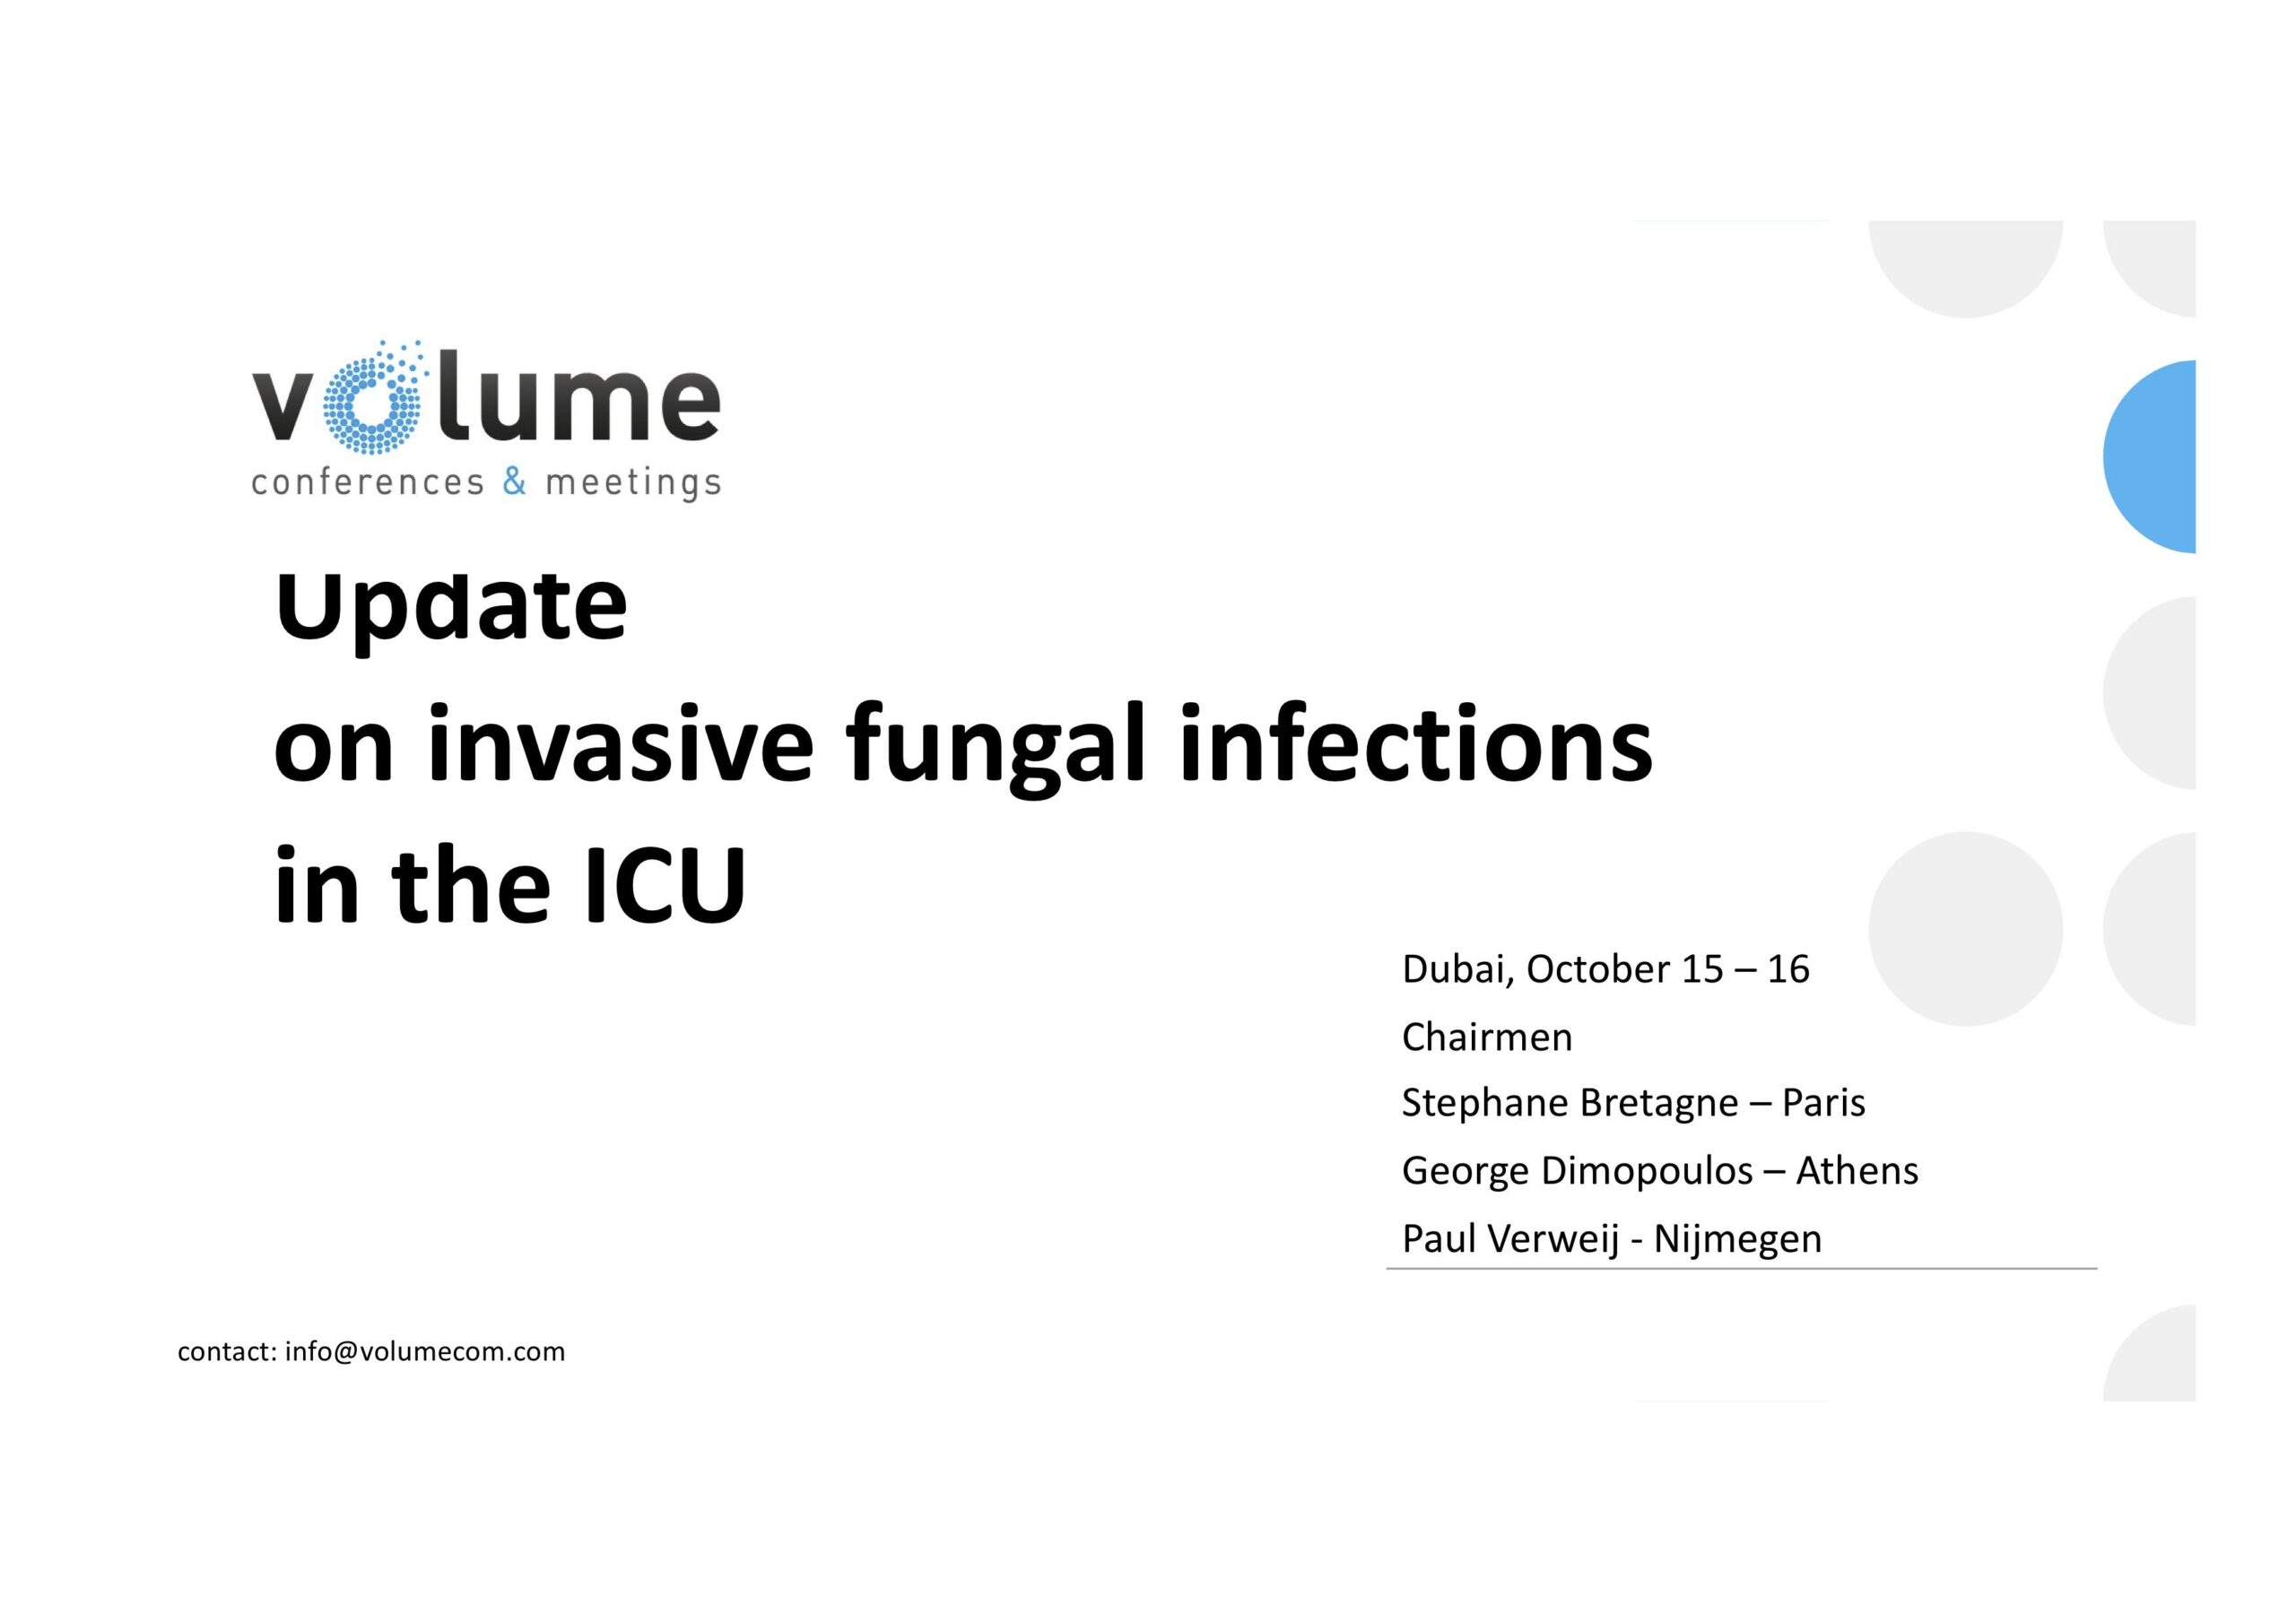 Update on the invasive fungal infections in the ICU